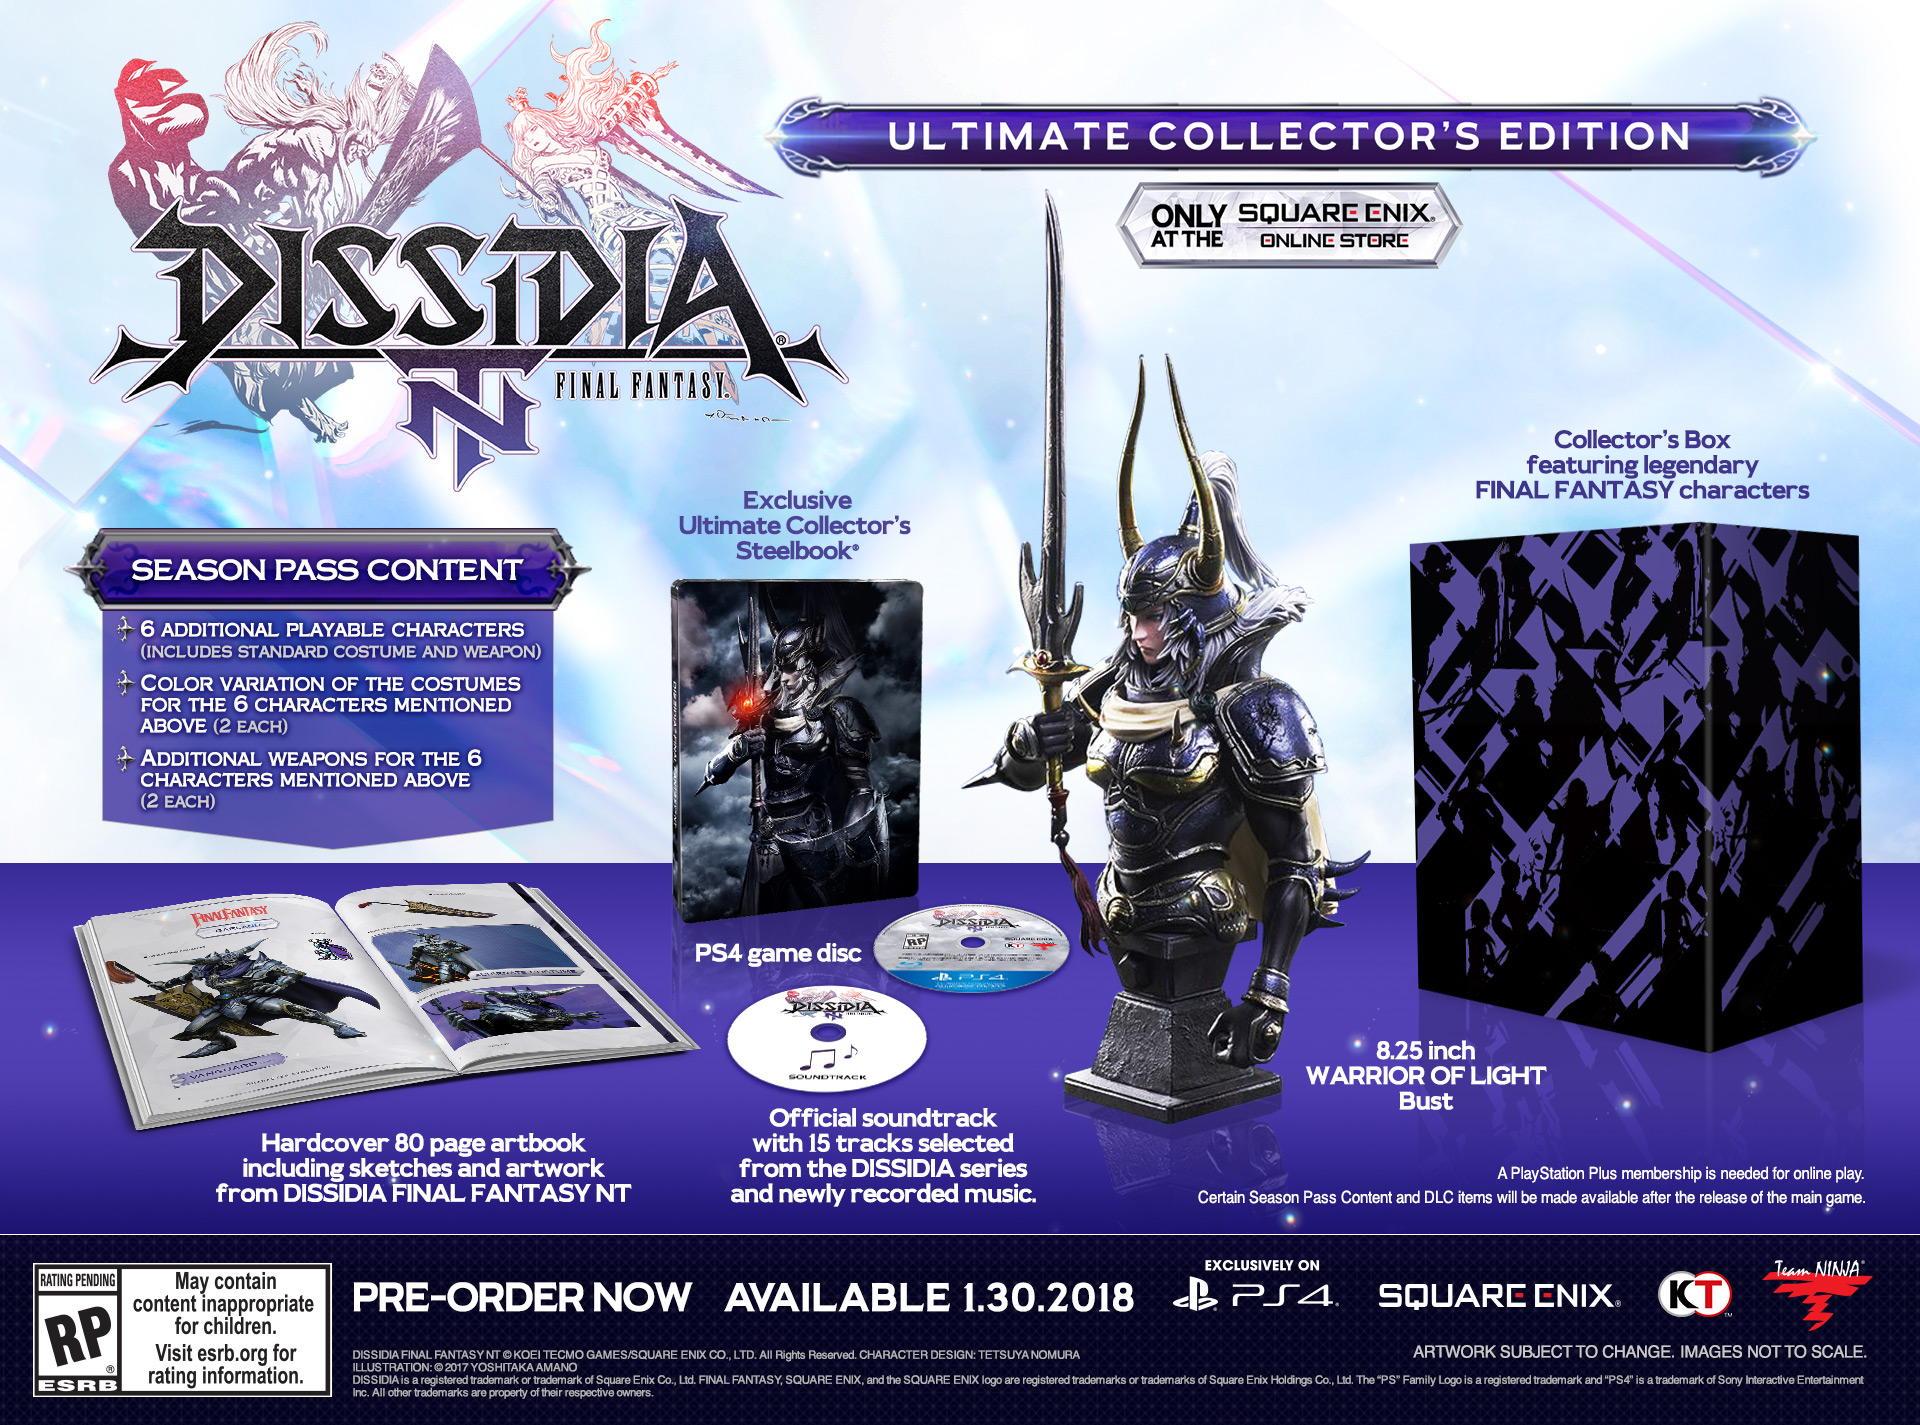 Dissida Final Fantasy NT Ultimate Collector's Edition